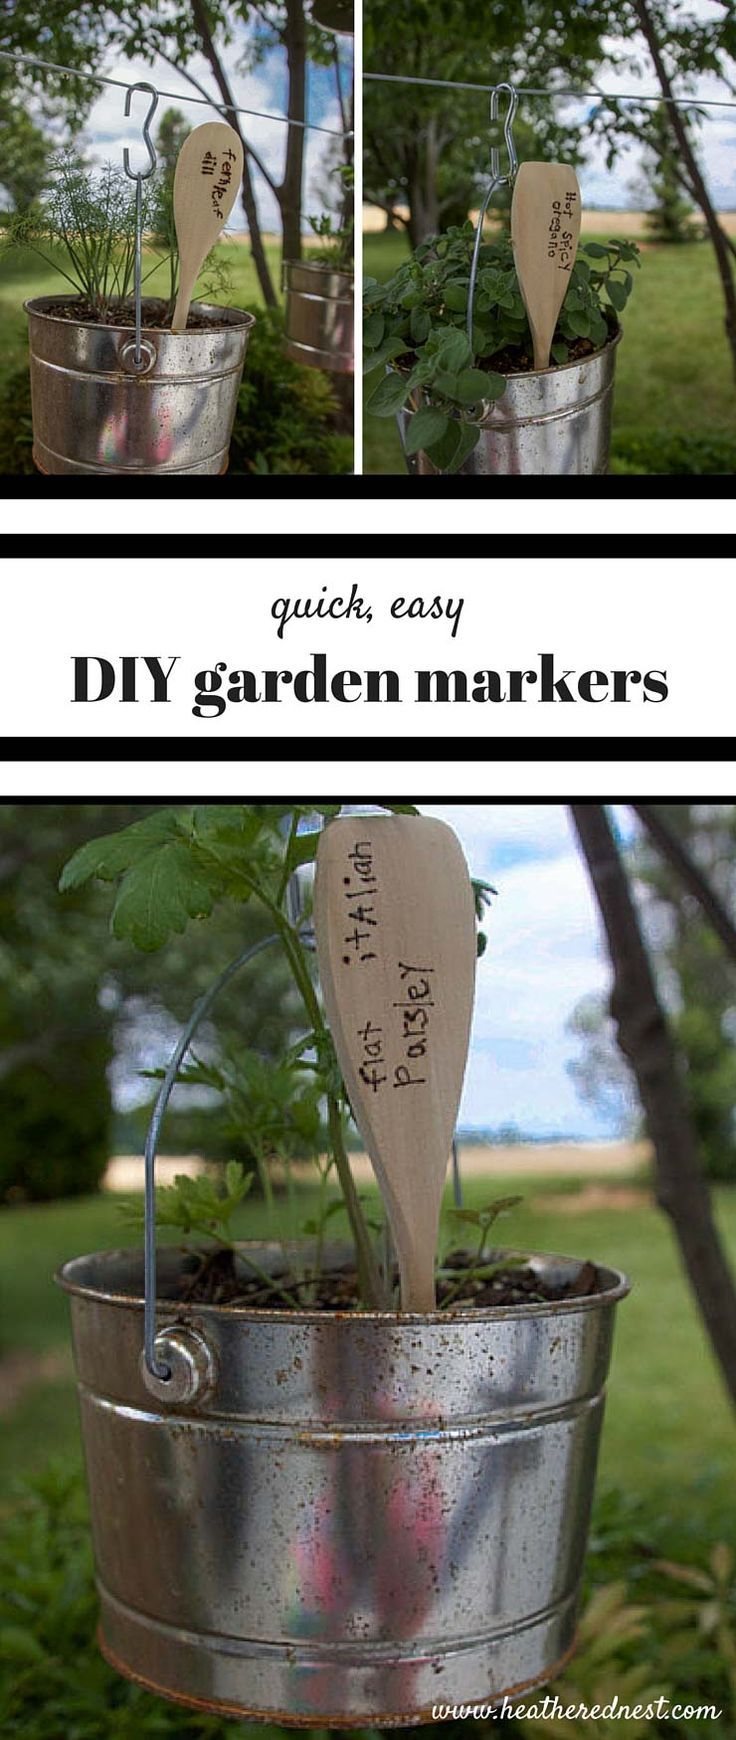 SUCH A GREAT, SIMPLE IDEA!! Quick, simple, inexpensive DIY plant labels garden m...